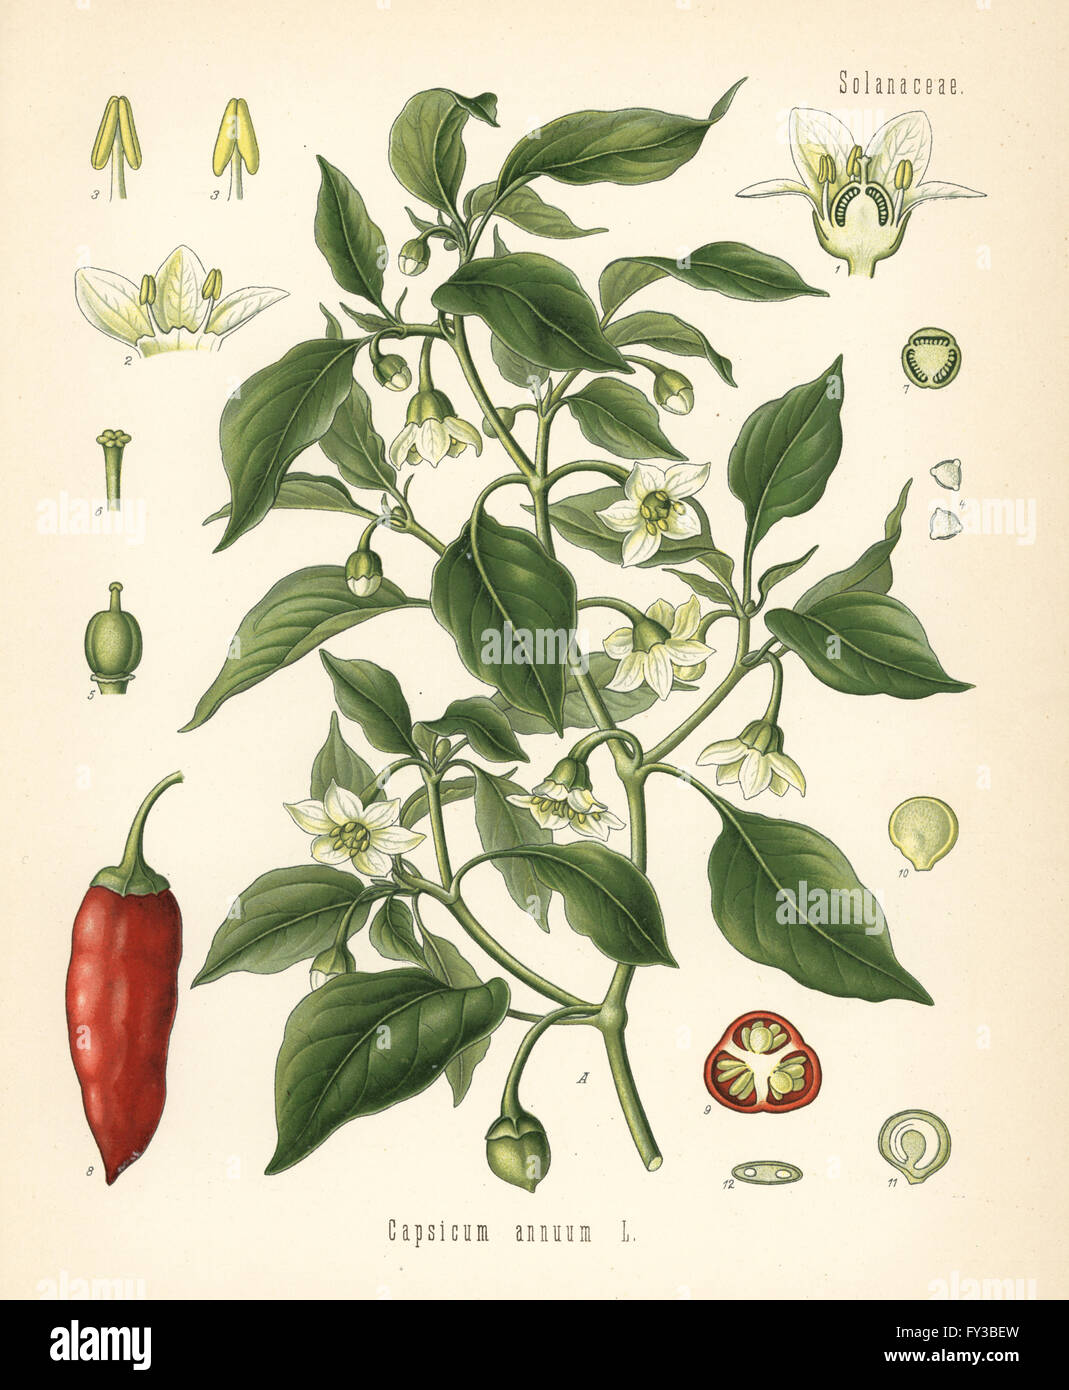 Chili pepper, Capsicum annuum. Chromolithograph after a botanical illustration from Hermann Adolph Koehler's Medicinal Plants, edited by Gustav Pabst, Koehler, Germany, 1887. Stock Photo